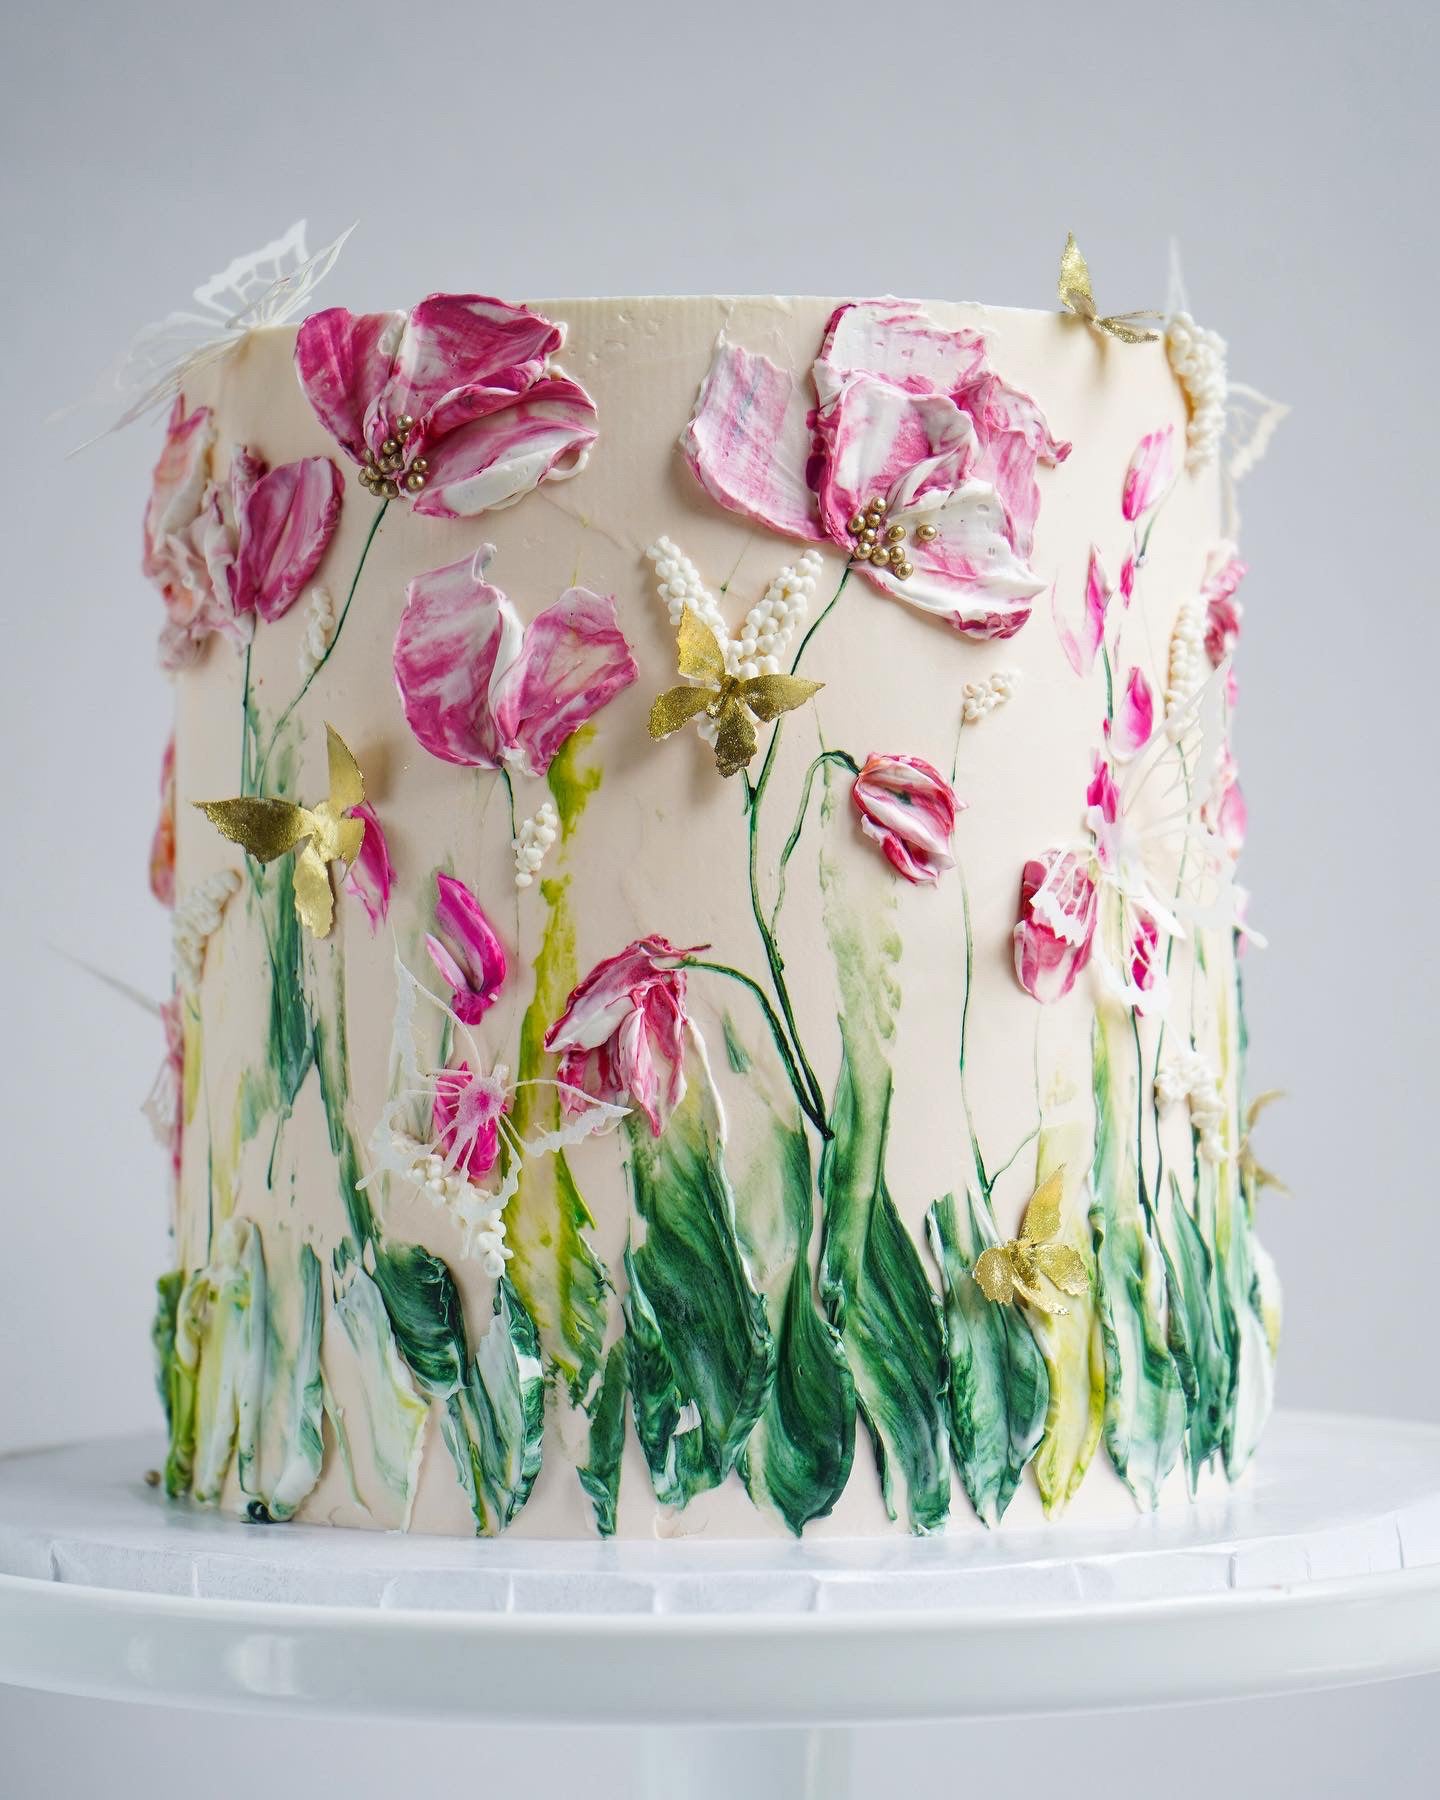 Floral Buttercream Cakes